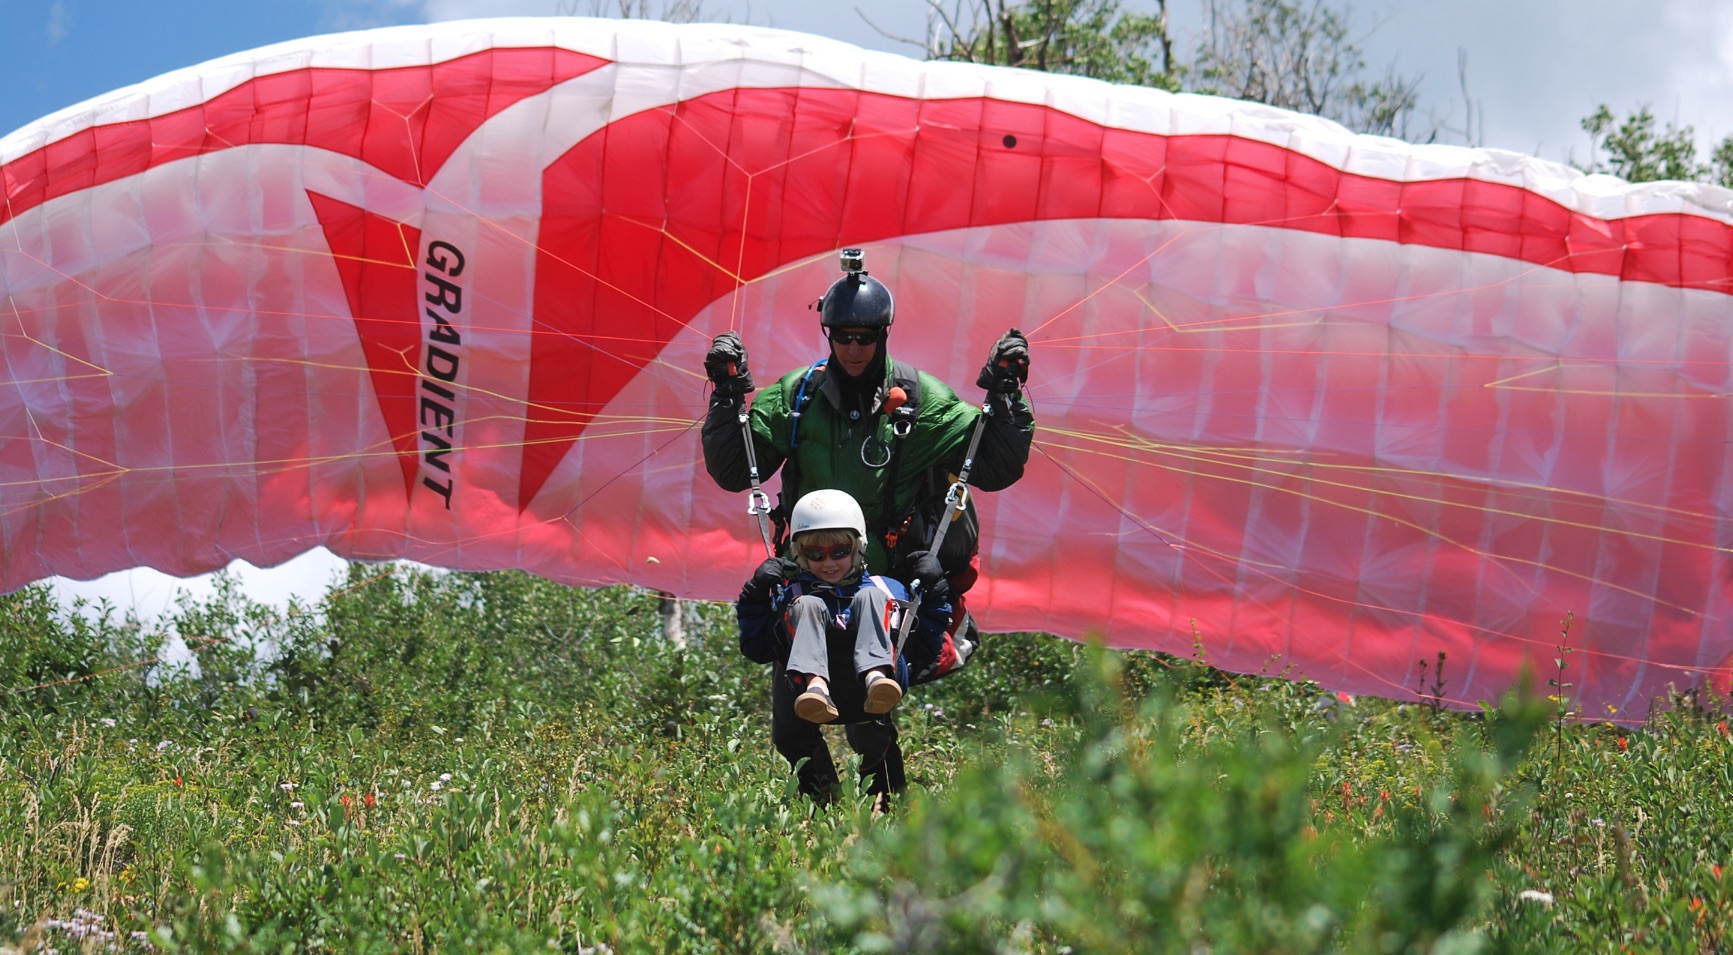 Capturing the essence of a tandem paragliding adventure, this photo showcases two paragliders gracefully descending to land in a lush green field. Both individuals are equipped with helmets, sunglasses, pants, and closed-toed shoes, emphasizing safety and preparedness for the landing. The vibrant green surroundings and the synchronized descent of the tandem paragliders create a harmonious scene of exhilaration and shared airborne excitement.